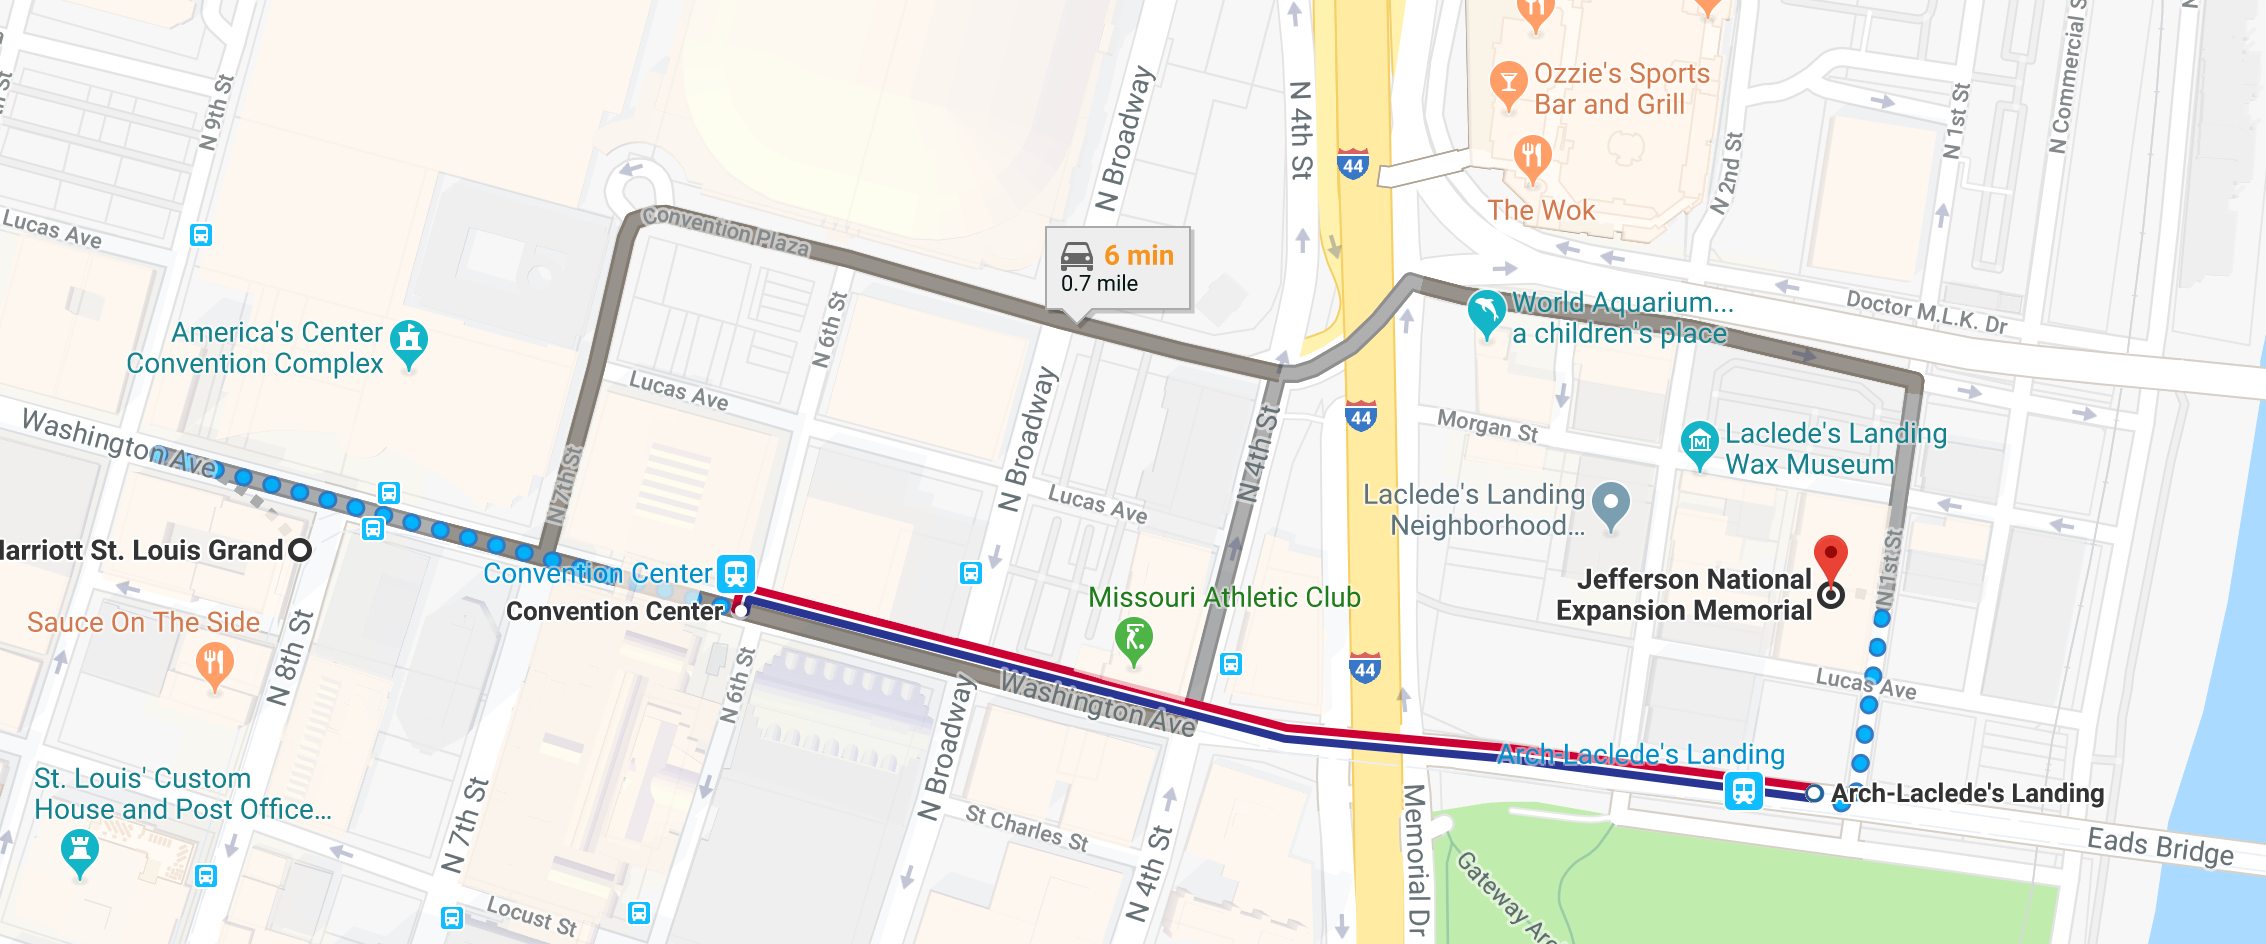 map to Arch-Laclede's Landing for expense management system conference